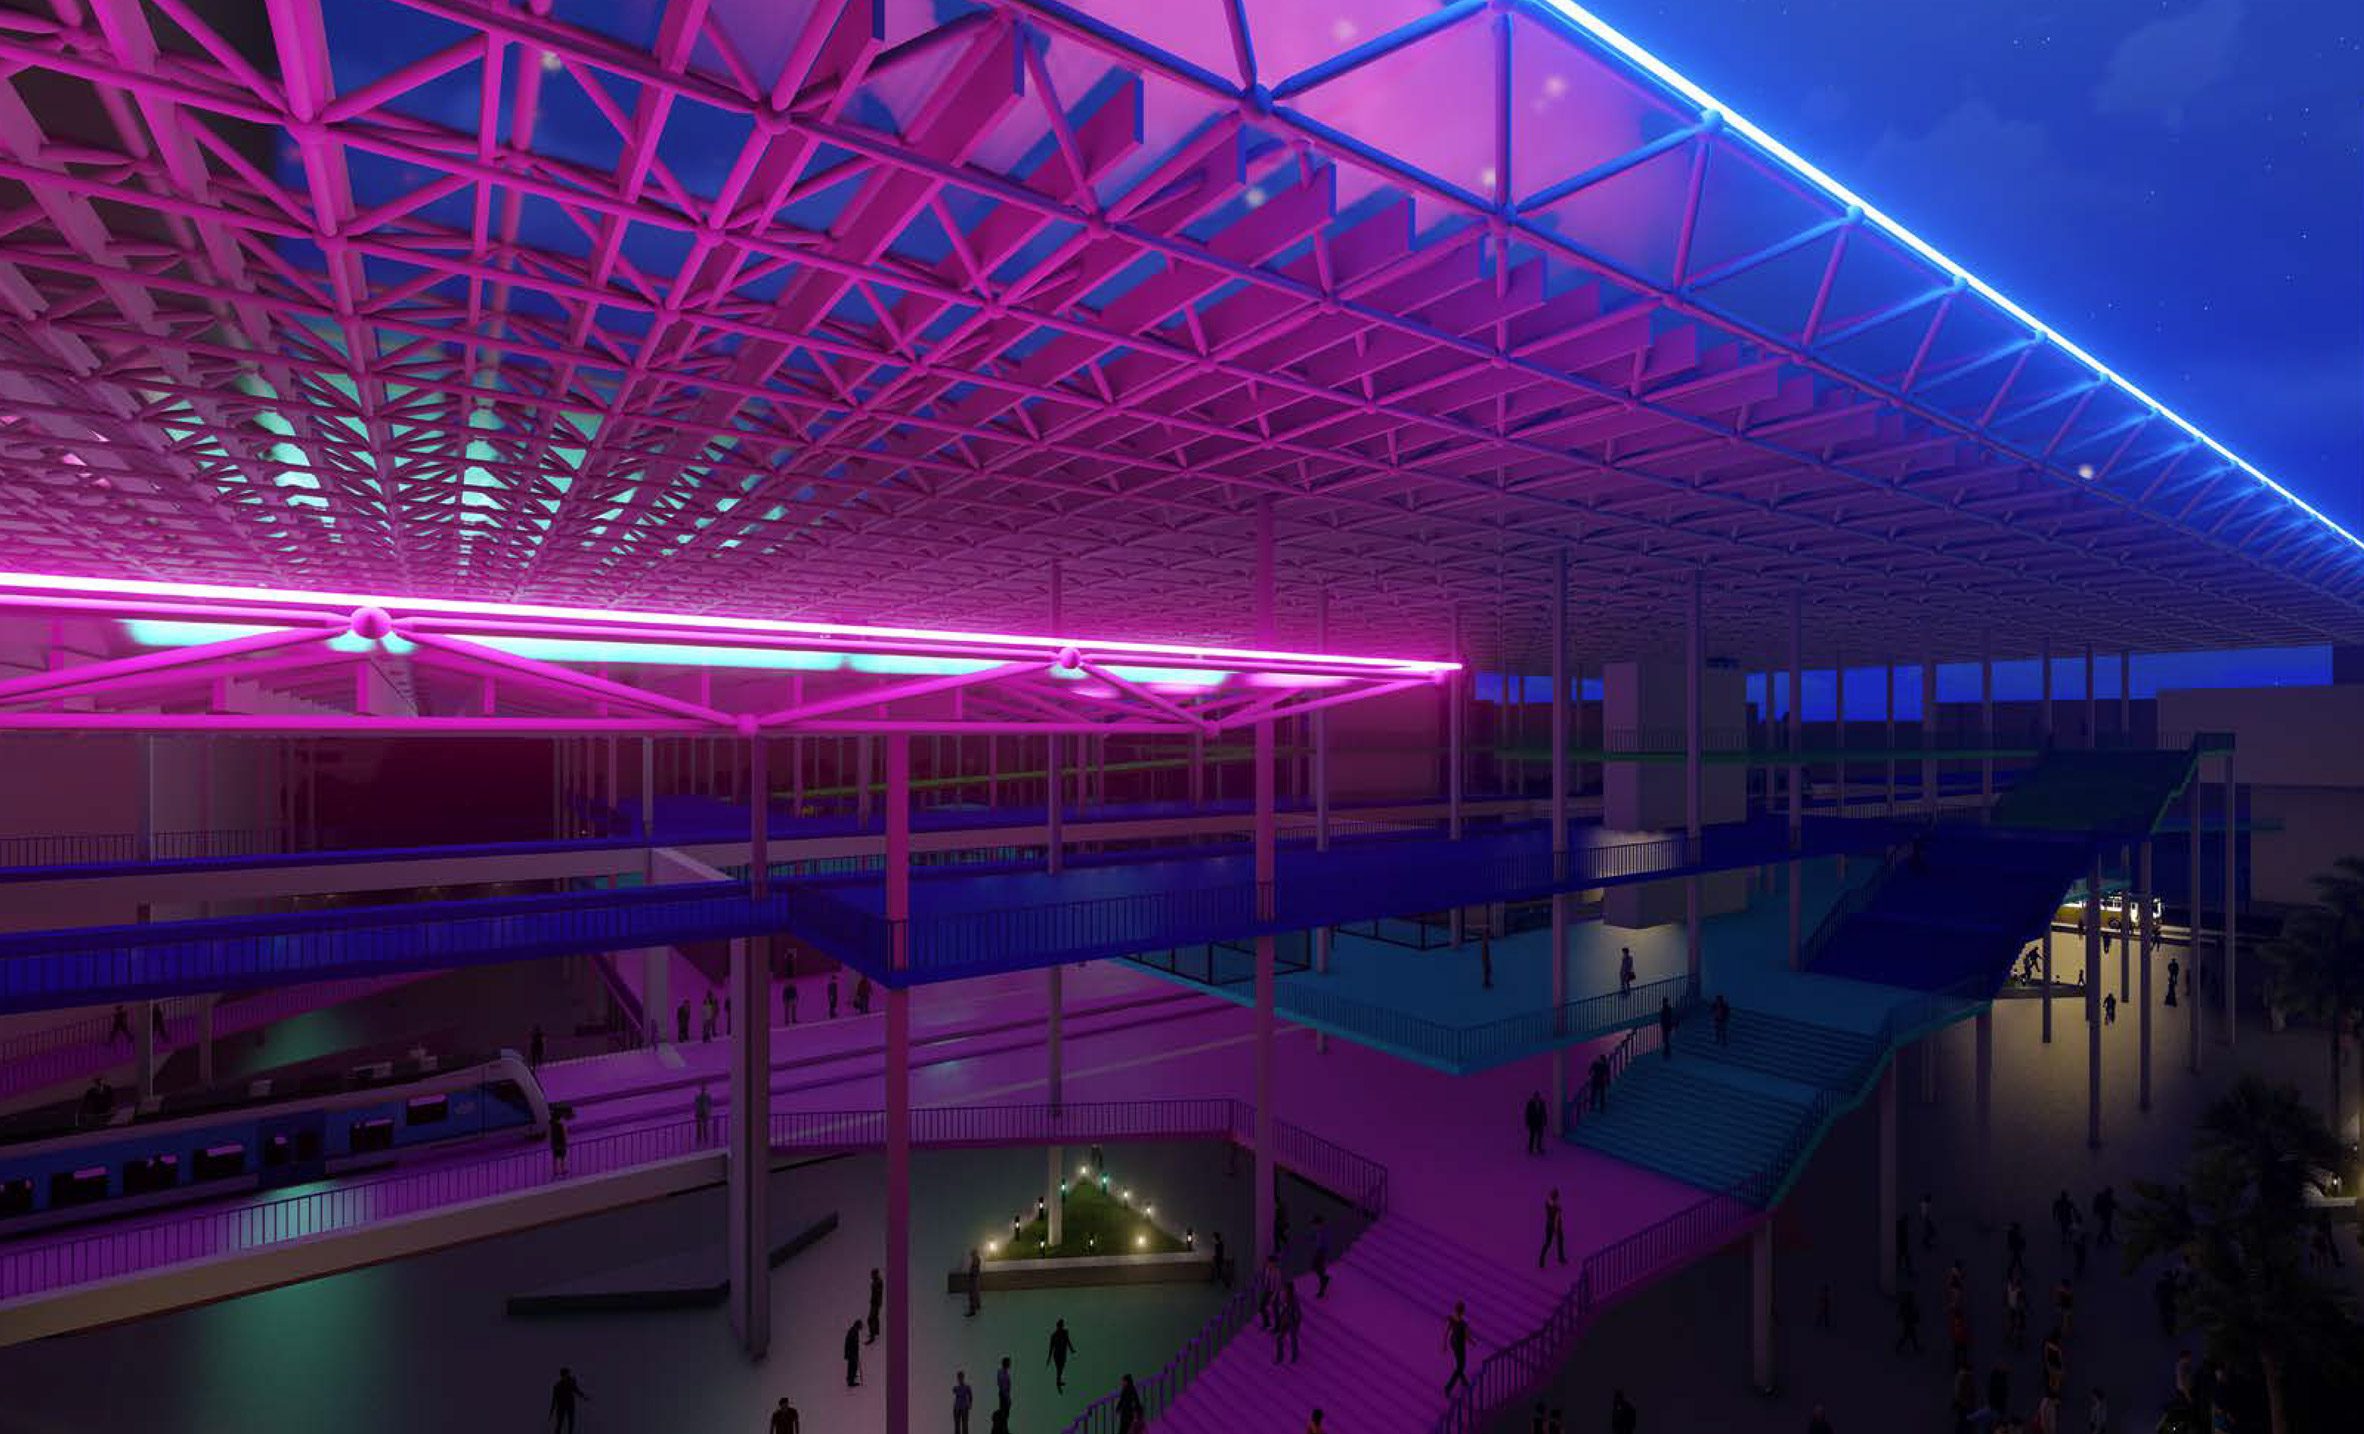 A visualisation of an urban shopping centre-like environment with neon lighting